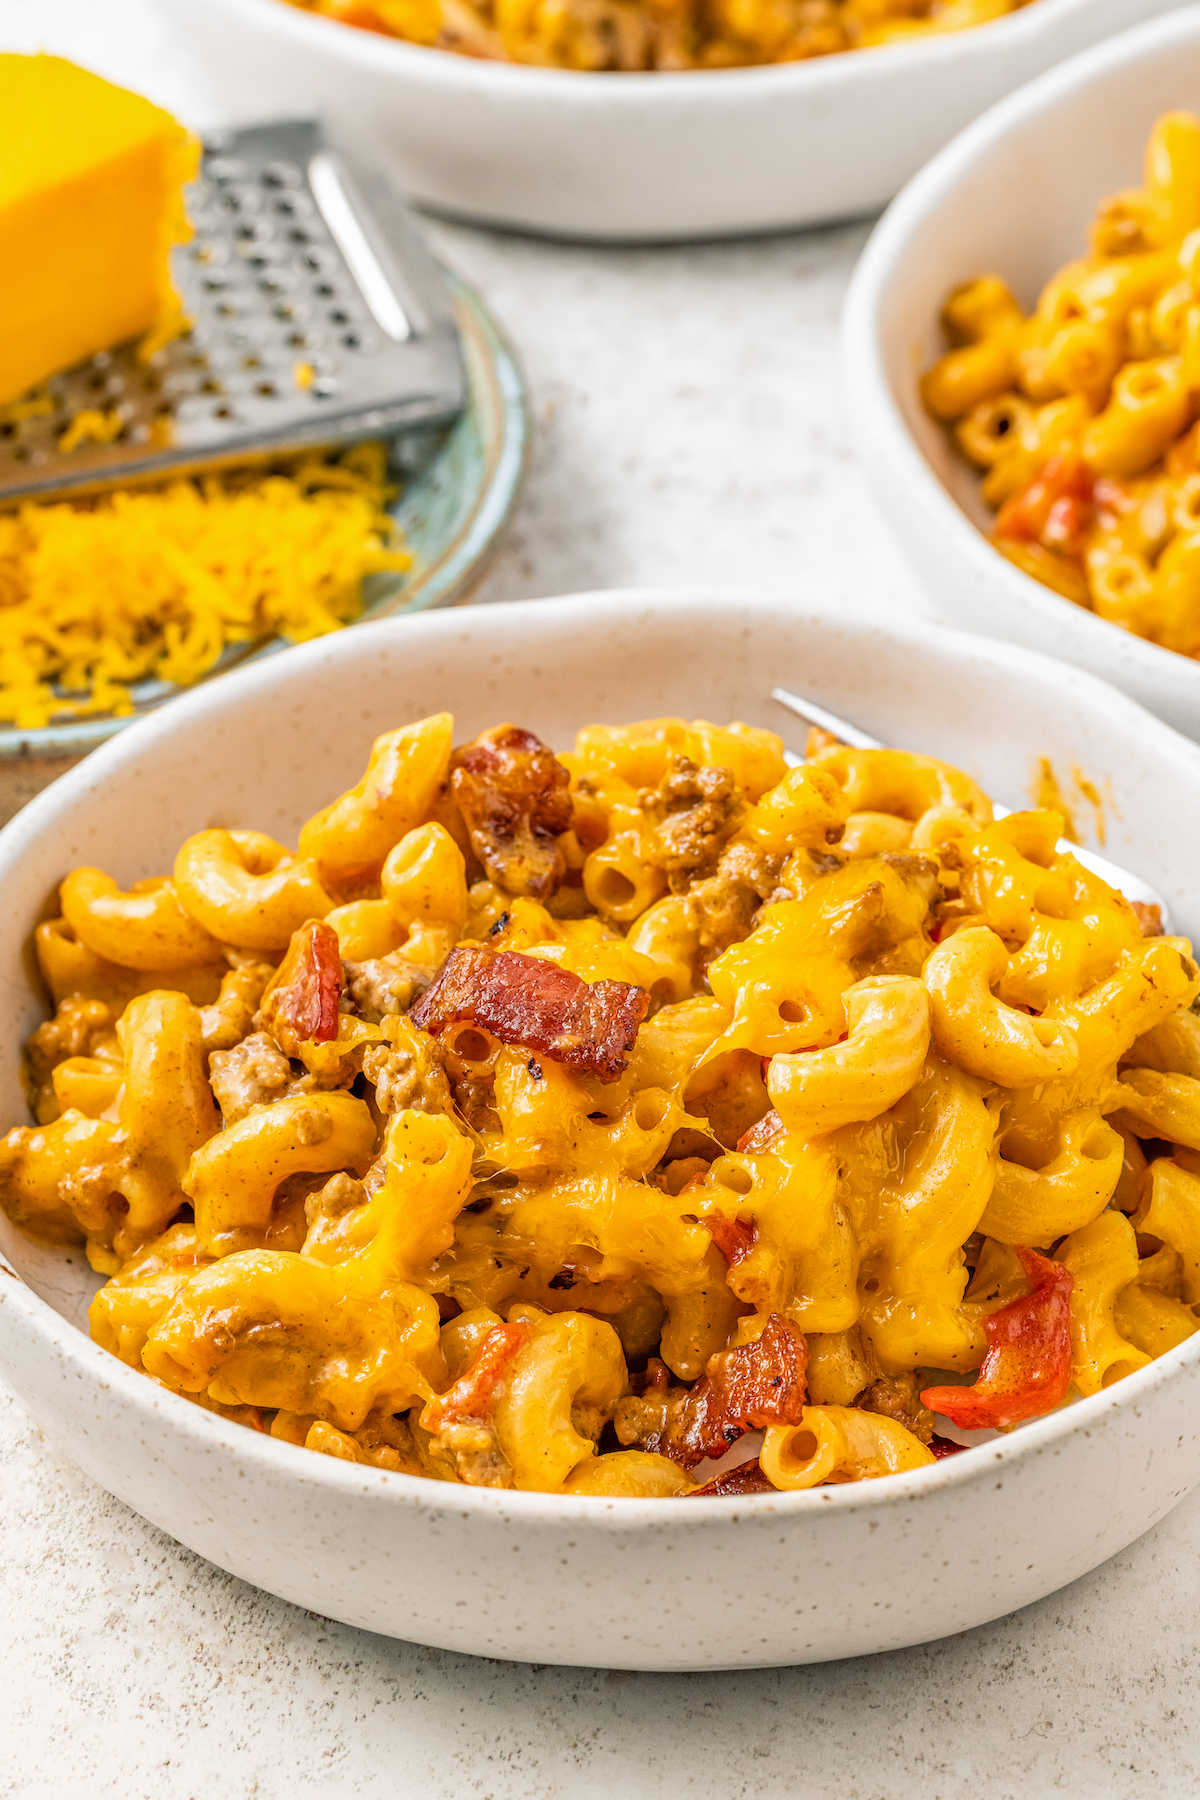 Bowls of macaroni with burger and tomatoes.